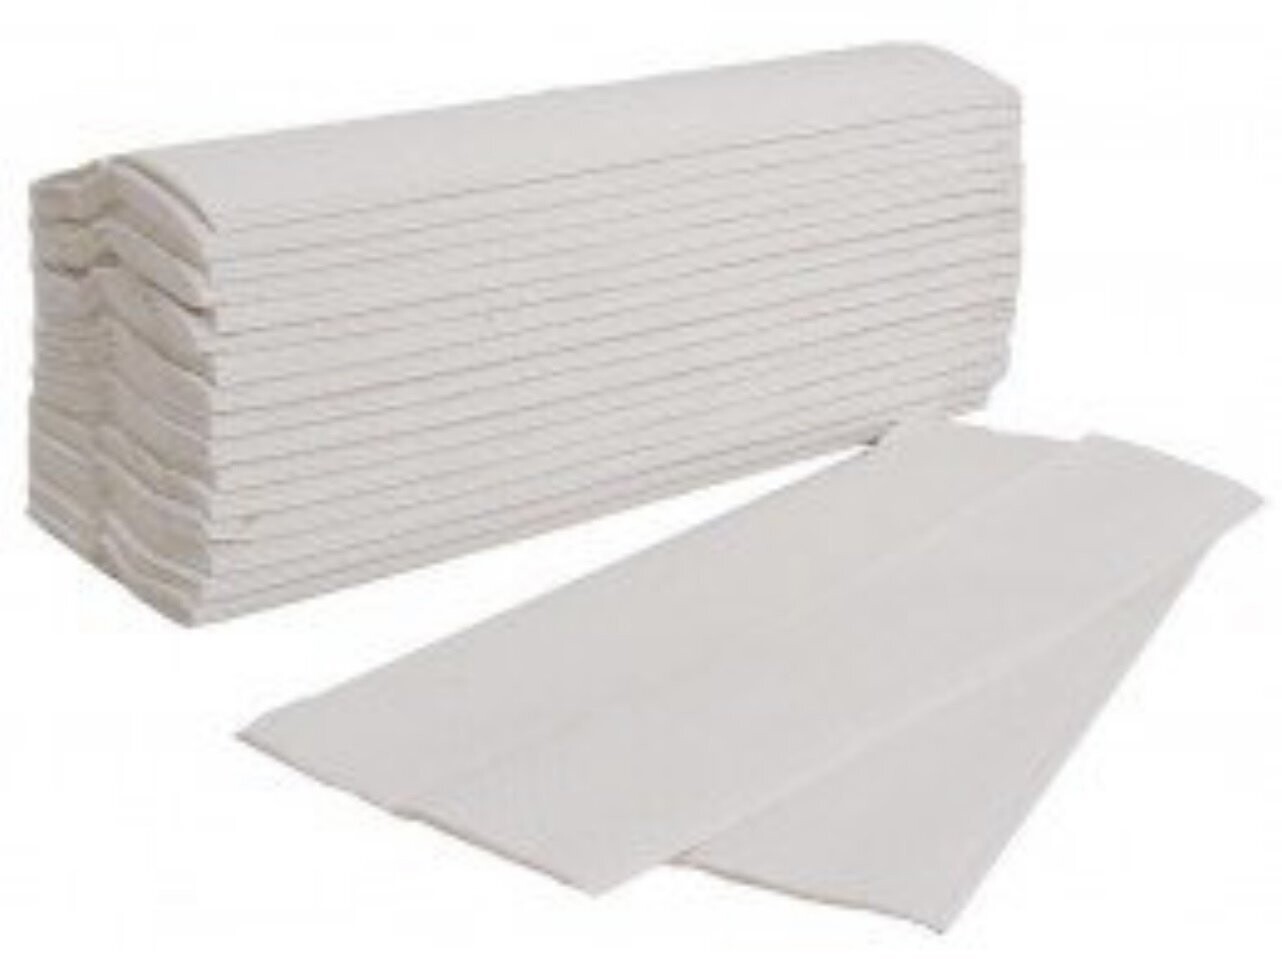 Z Fold 2 Ply White Hand Paper Towels (case of 3000)